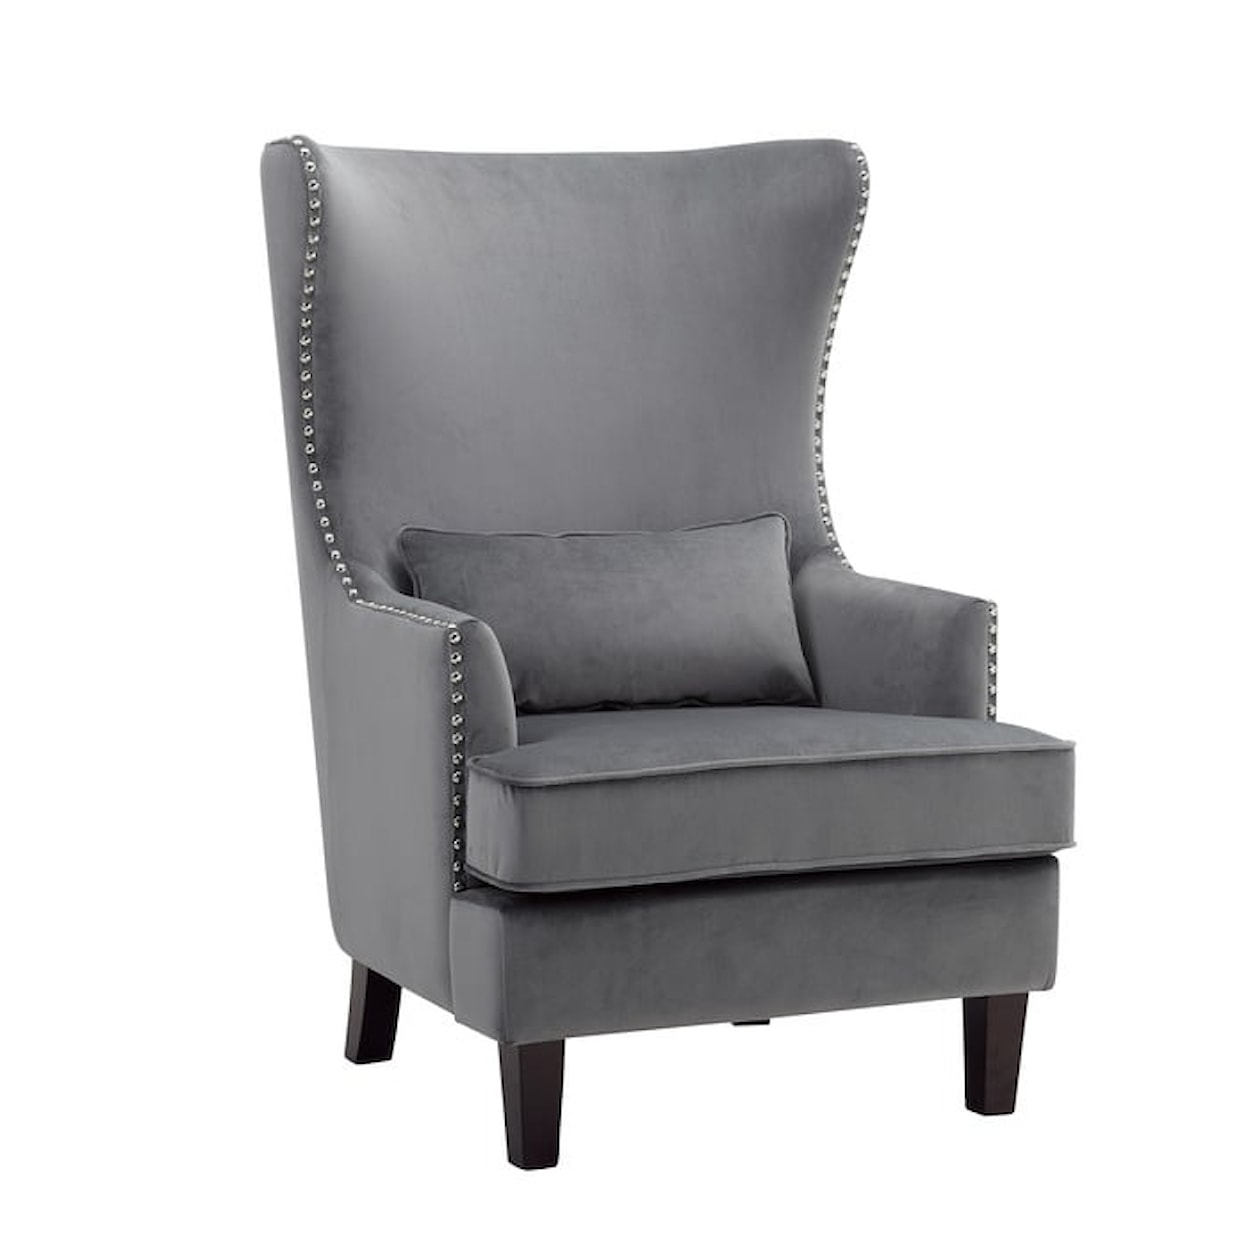 Homelegance Tonier Wingback Accent Chair